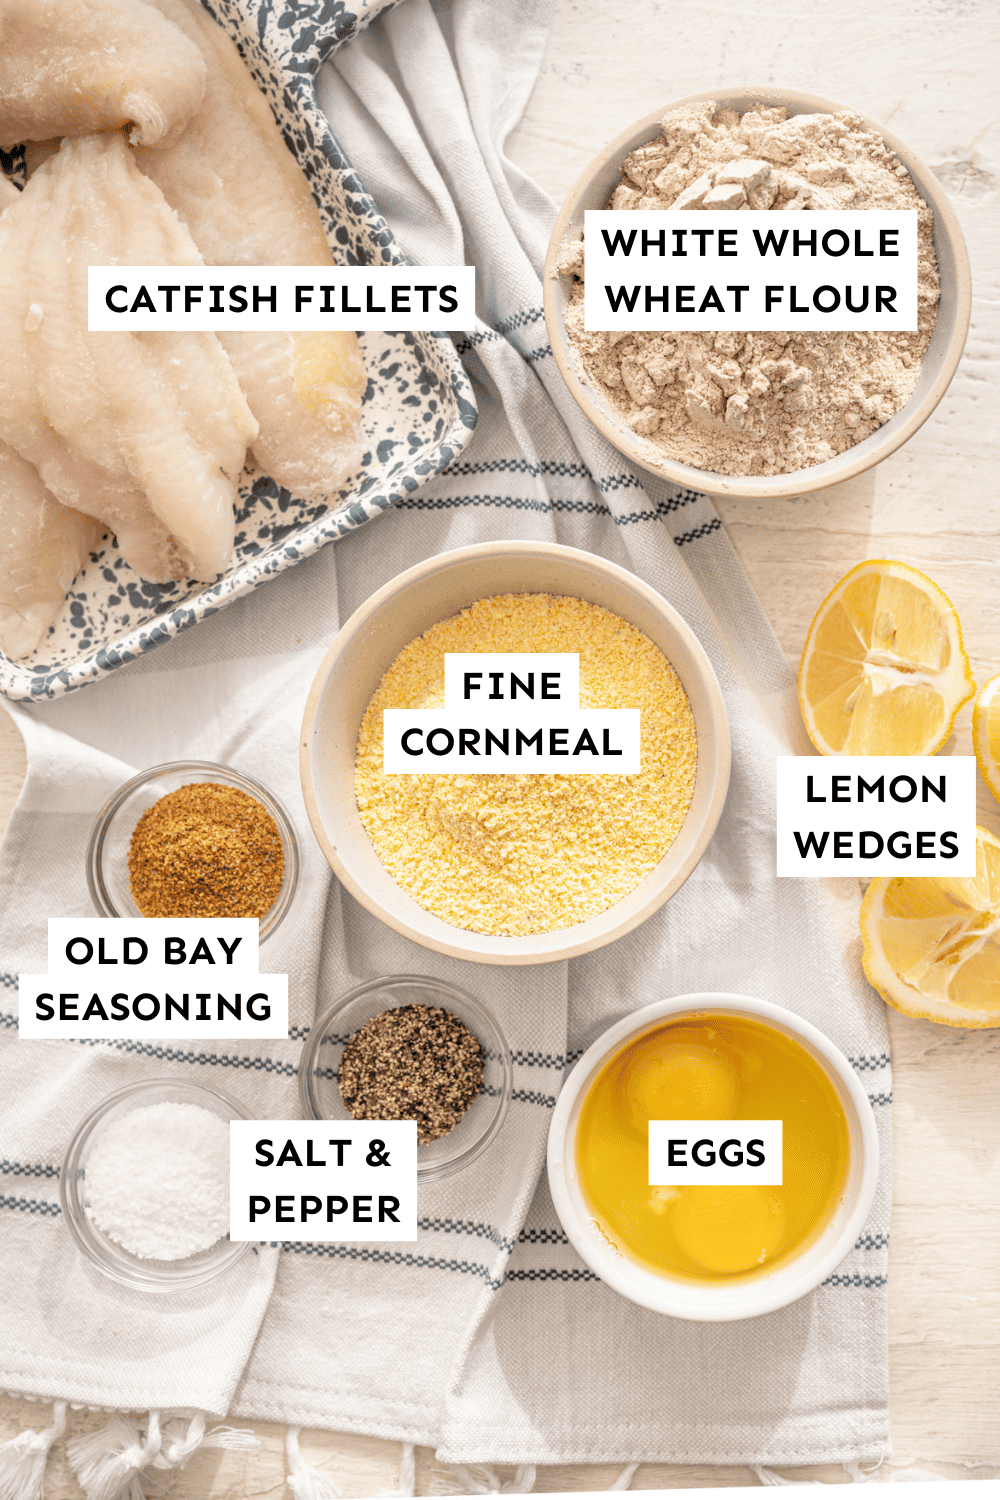 Fried catfish ingredients measured in bowls and labeled.